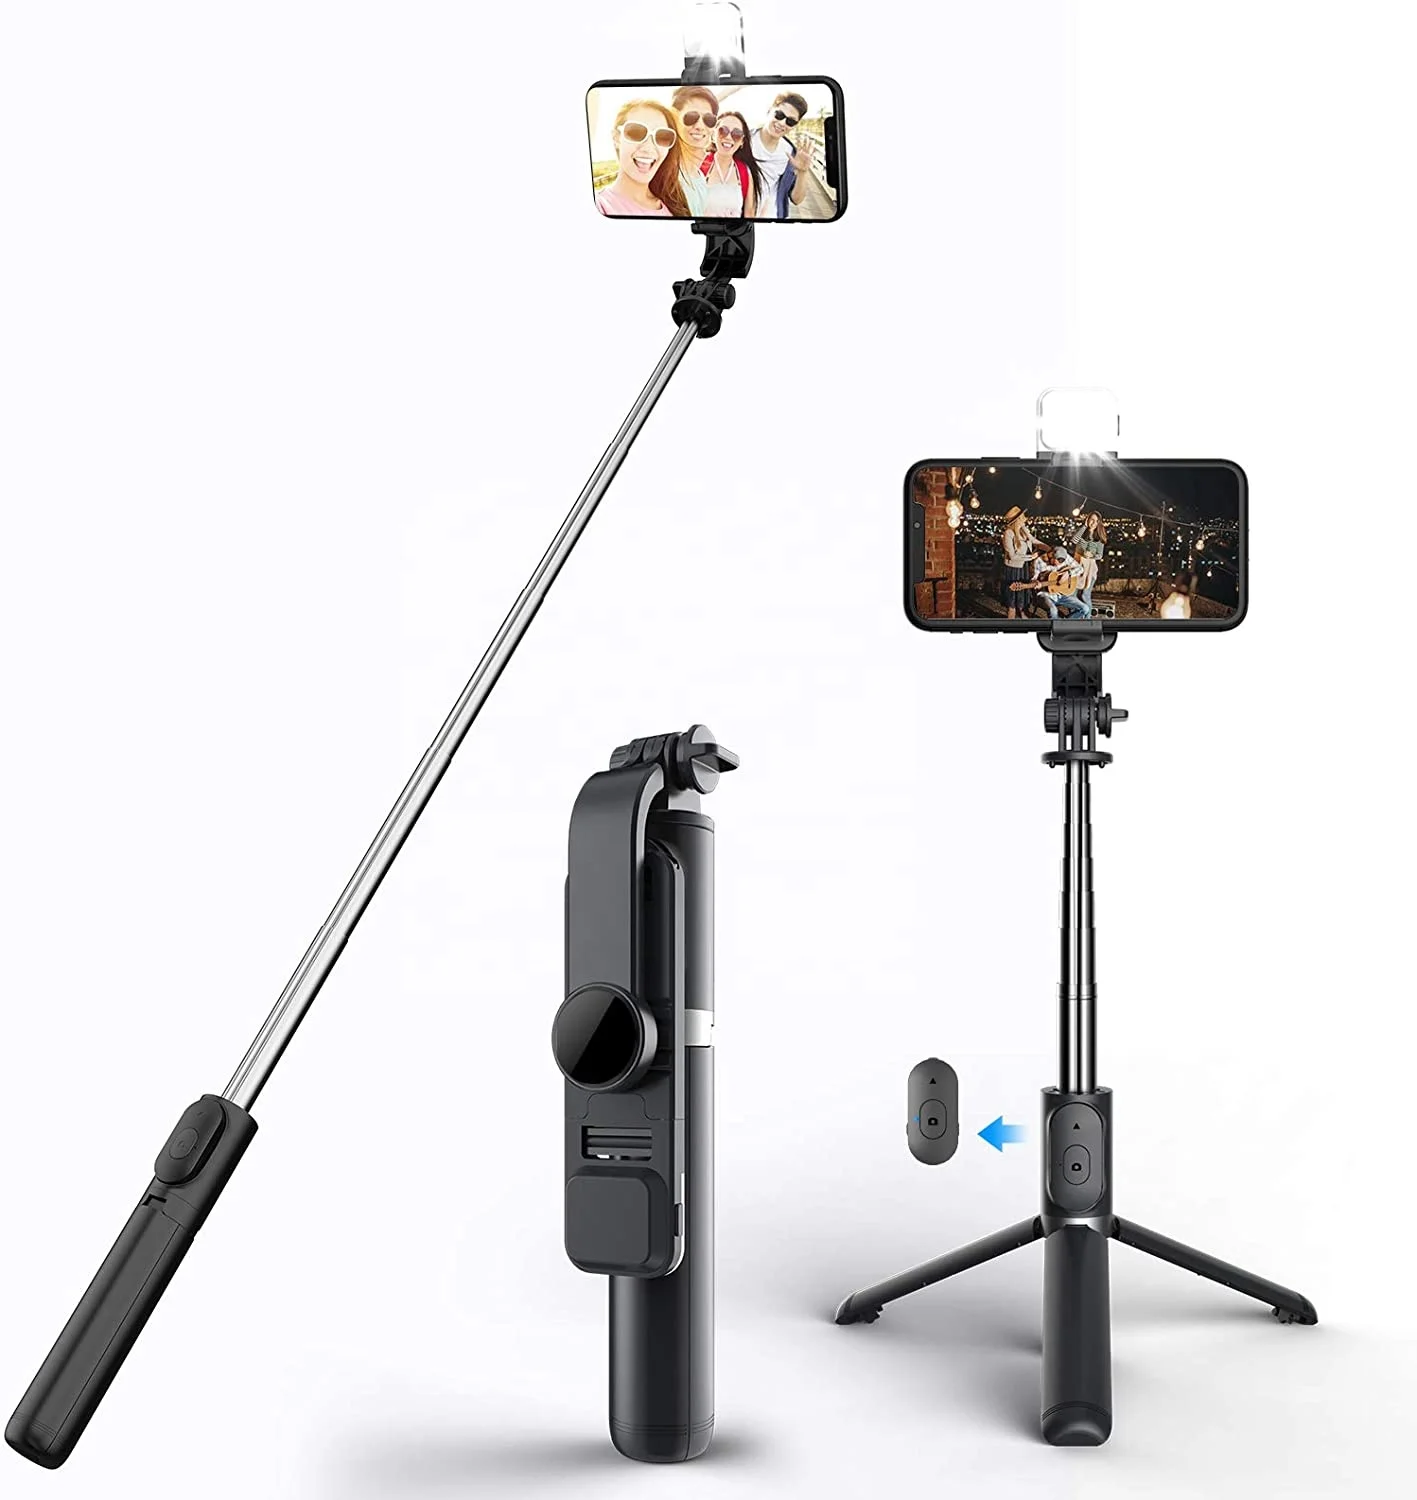 

CYKE Q02s Selfie Stick wireless Tripod with Beauty Light 3 in 1 Extendable Phone Stand Holder Fill Light with Wireless Remote